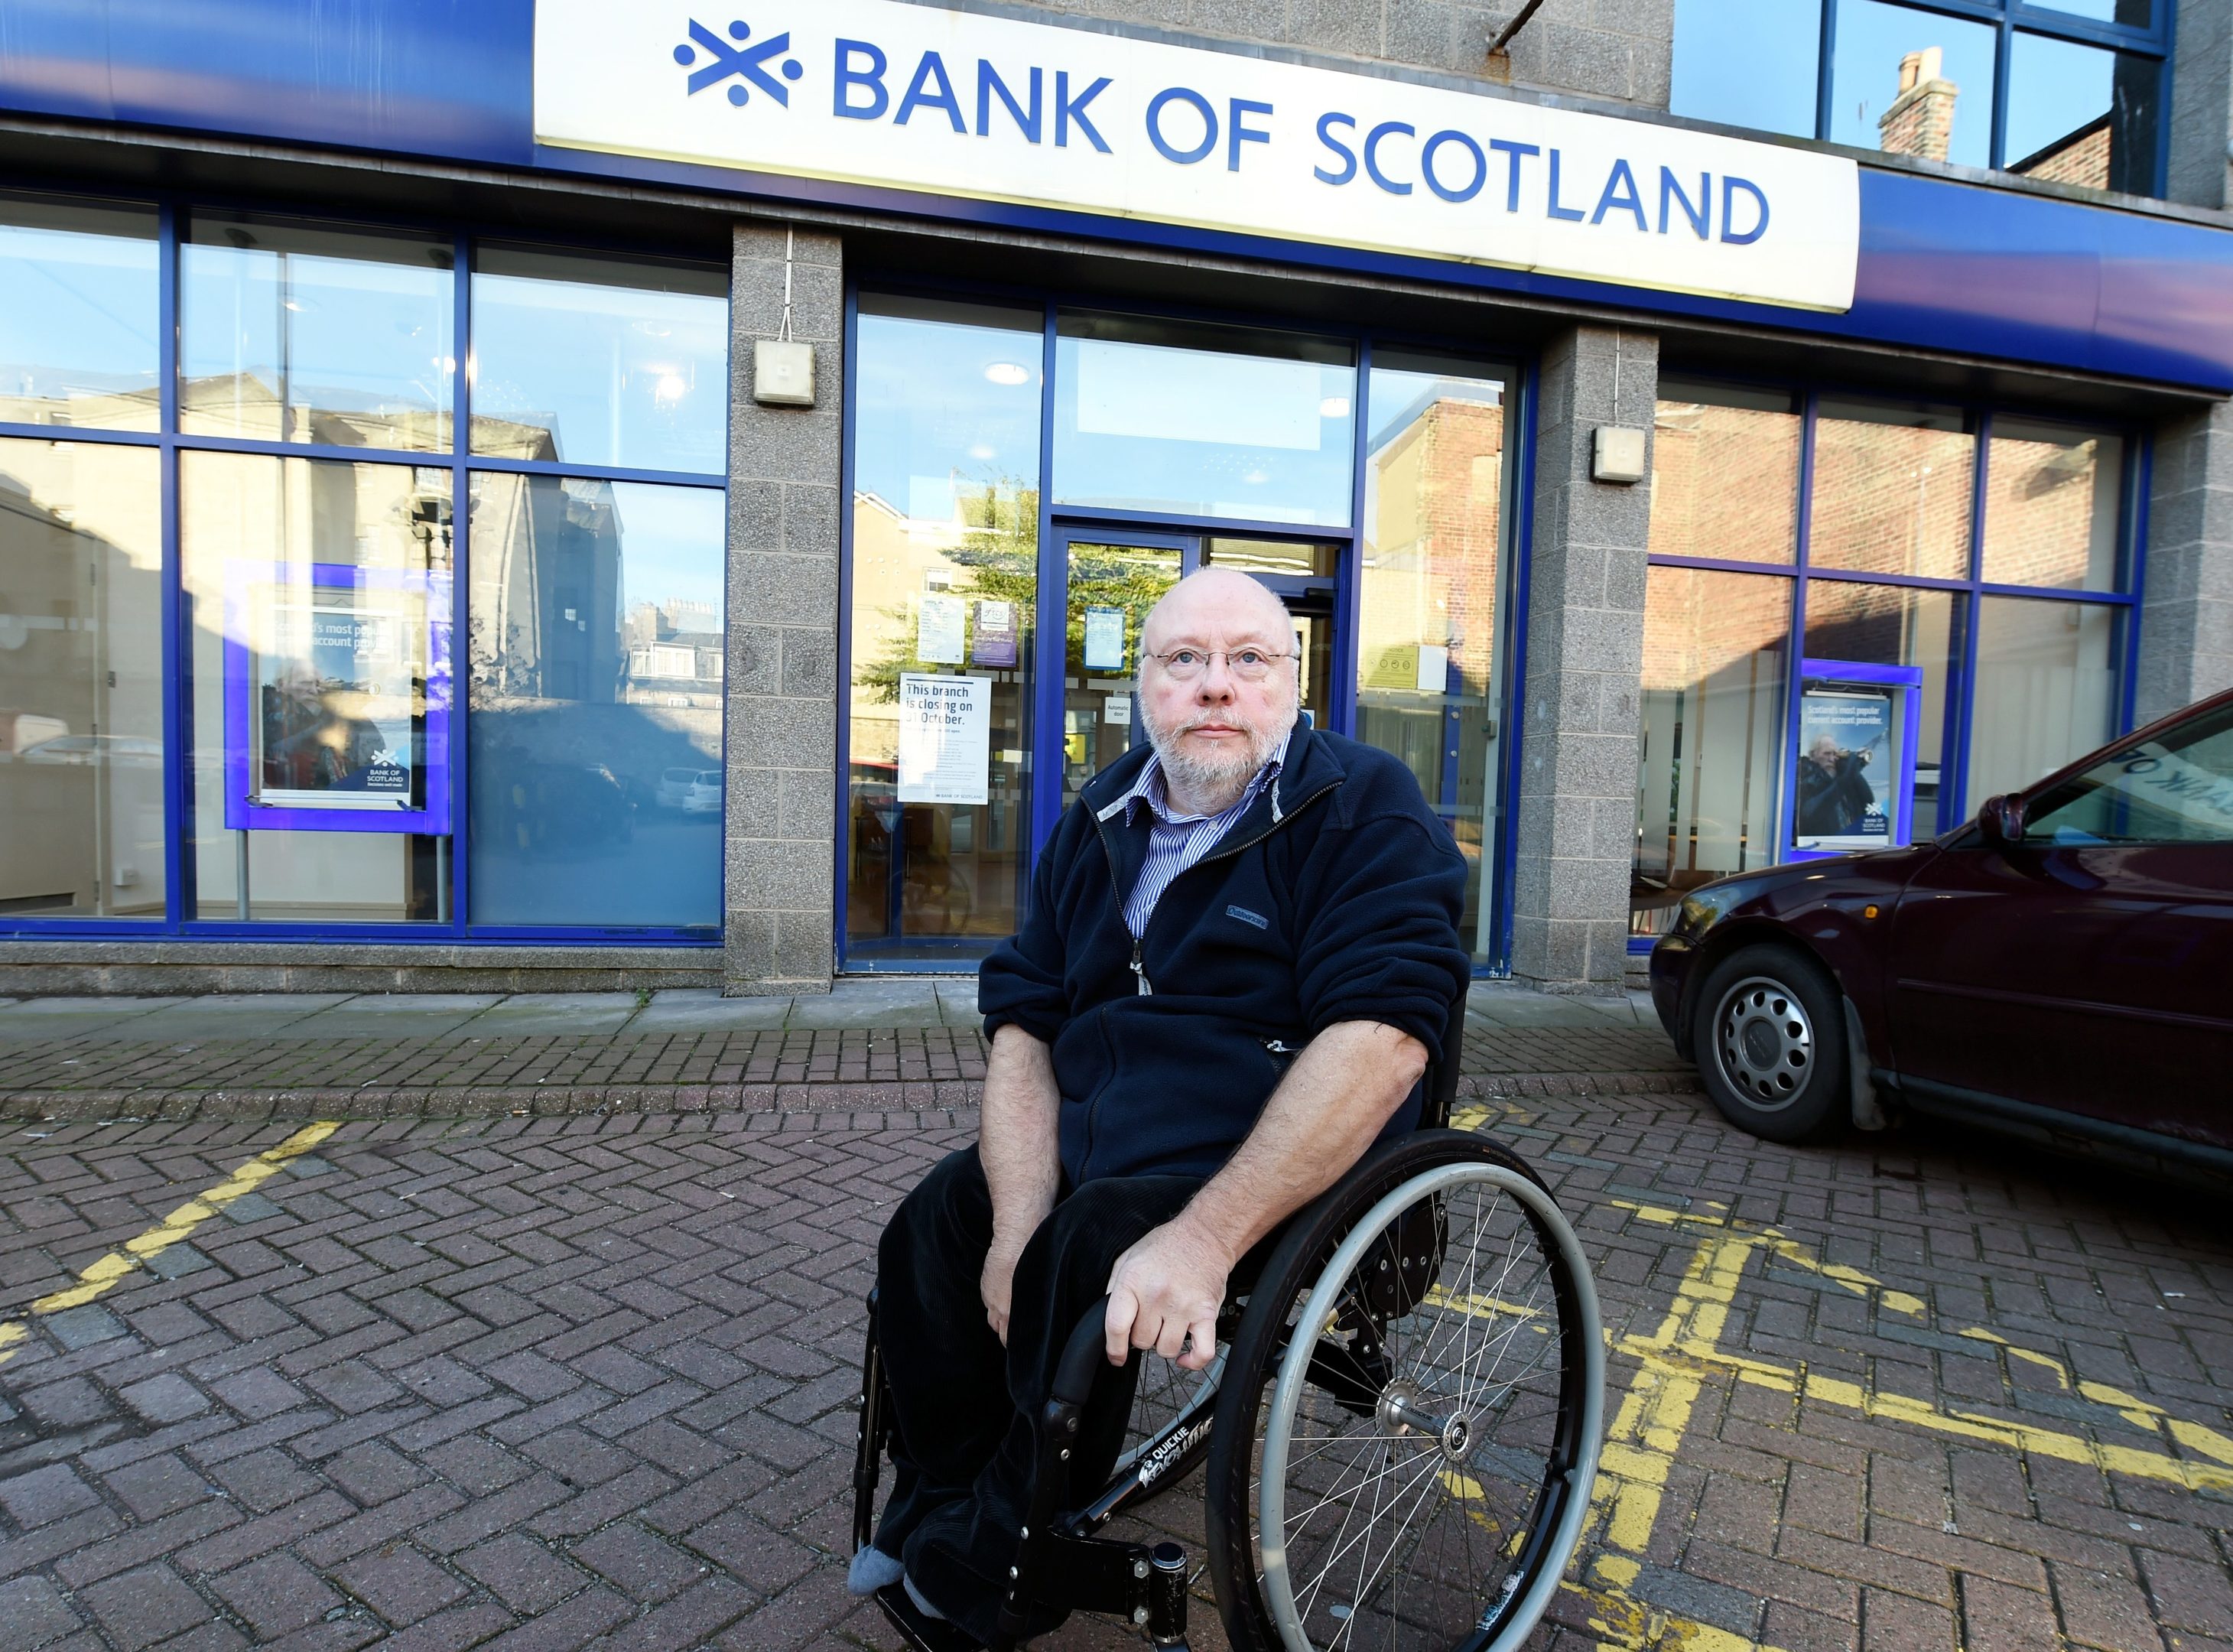 The Bank of Scotland/Halifax at John Street, Aberdeen, is closing at the end of the month with other branches not wheelchair friendly. In the picture is wheelchair user, Ron Holding at the bank. 
Picture by Jim Irvine  30-9-16